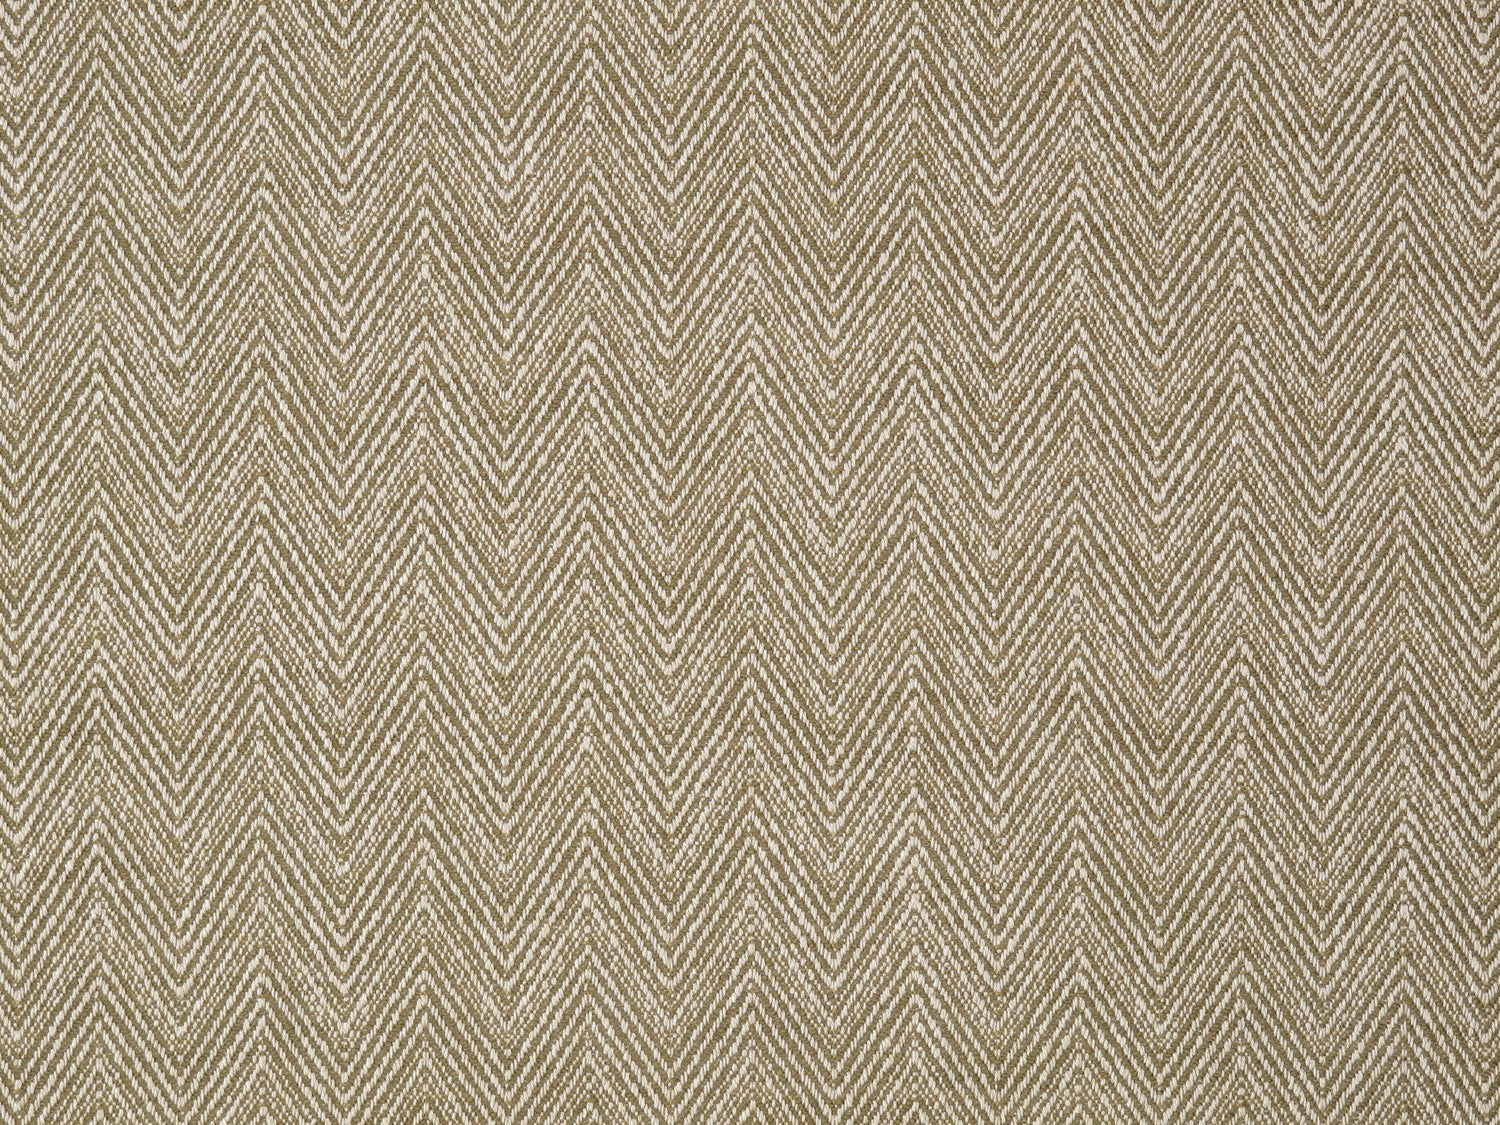 Berwick fabric in grass color - pattern number PN 92014082 - by Scalamandre in the Old World Weavers collection